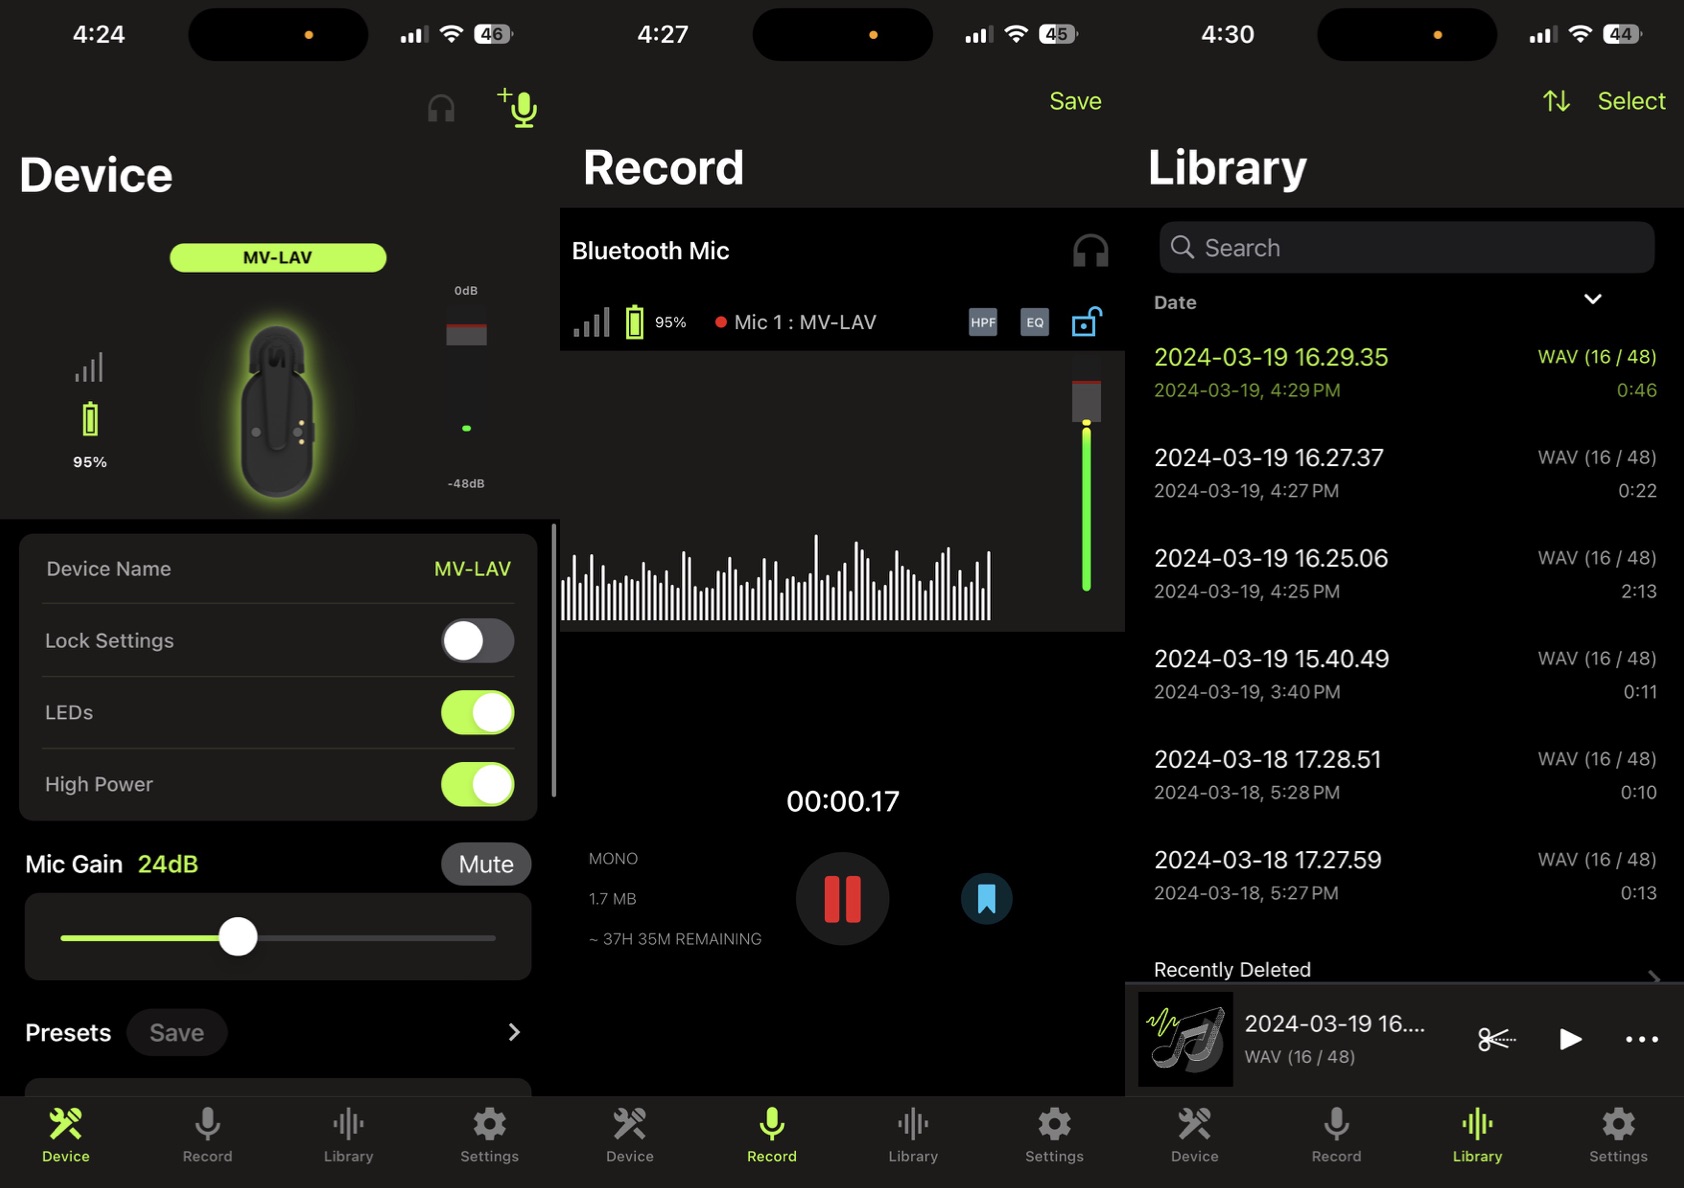 Screen shot of the Shure MOTIV app showing microphone controls, recordings and library of files.